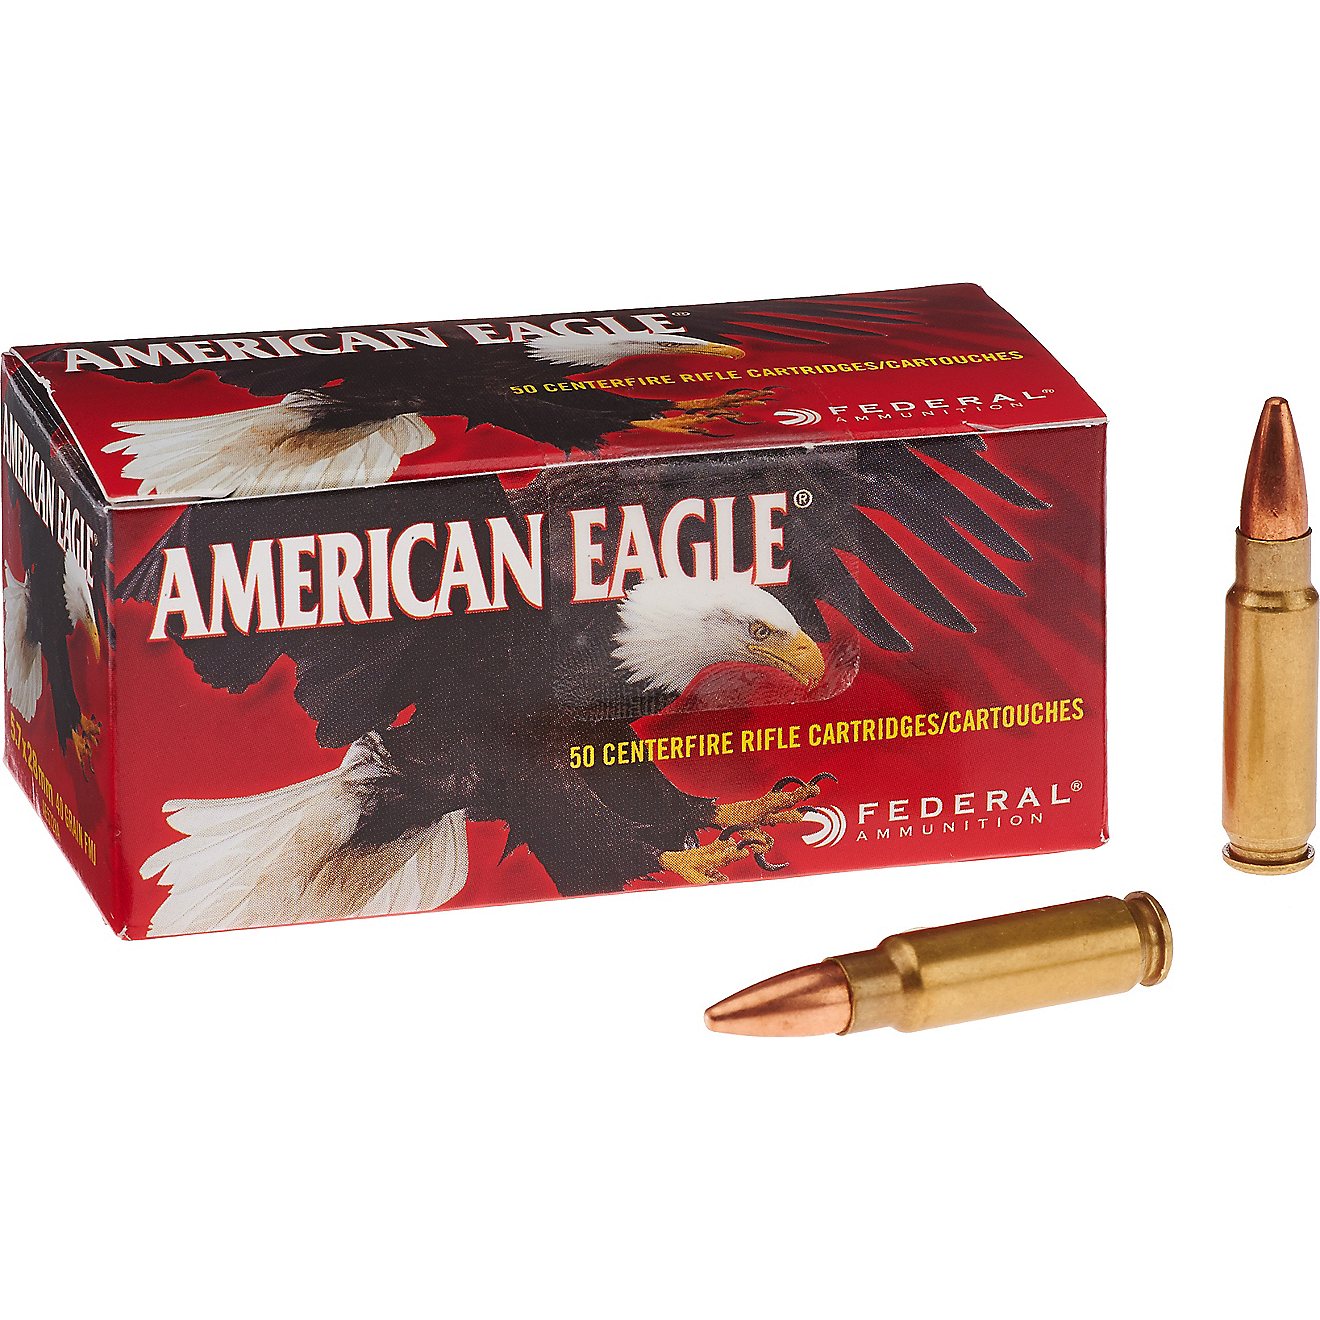 Federal Premium American Eagle 5.7 x 28mm 40-Grain Centerfire Rifle Ammunition - 50 Rounds                                       - view number 1